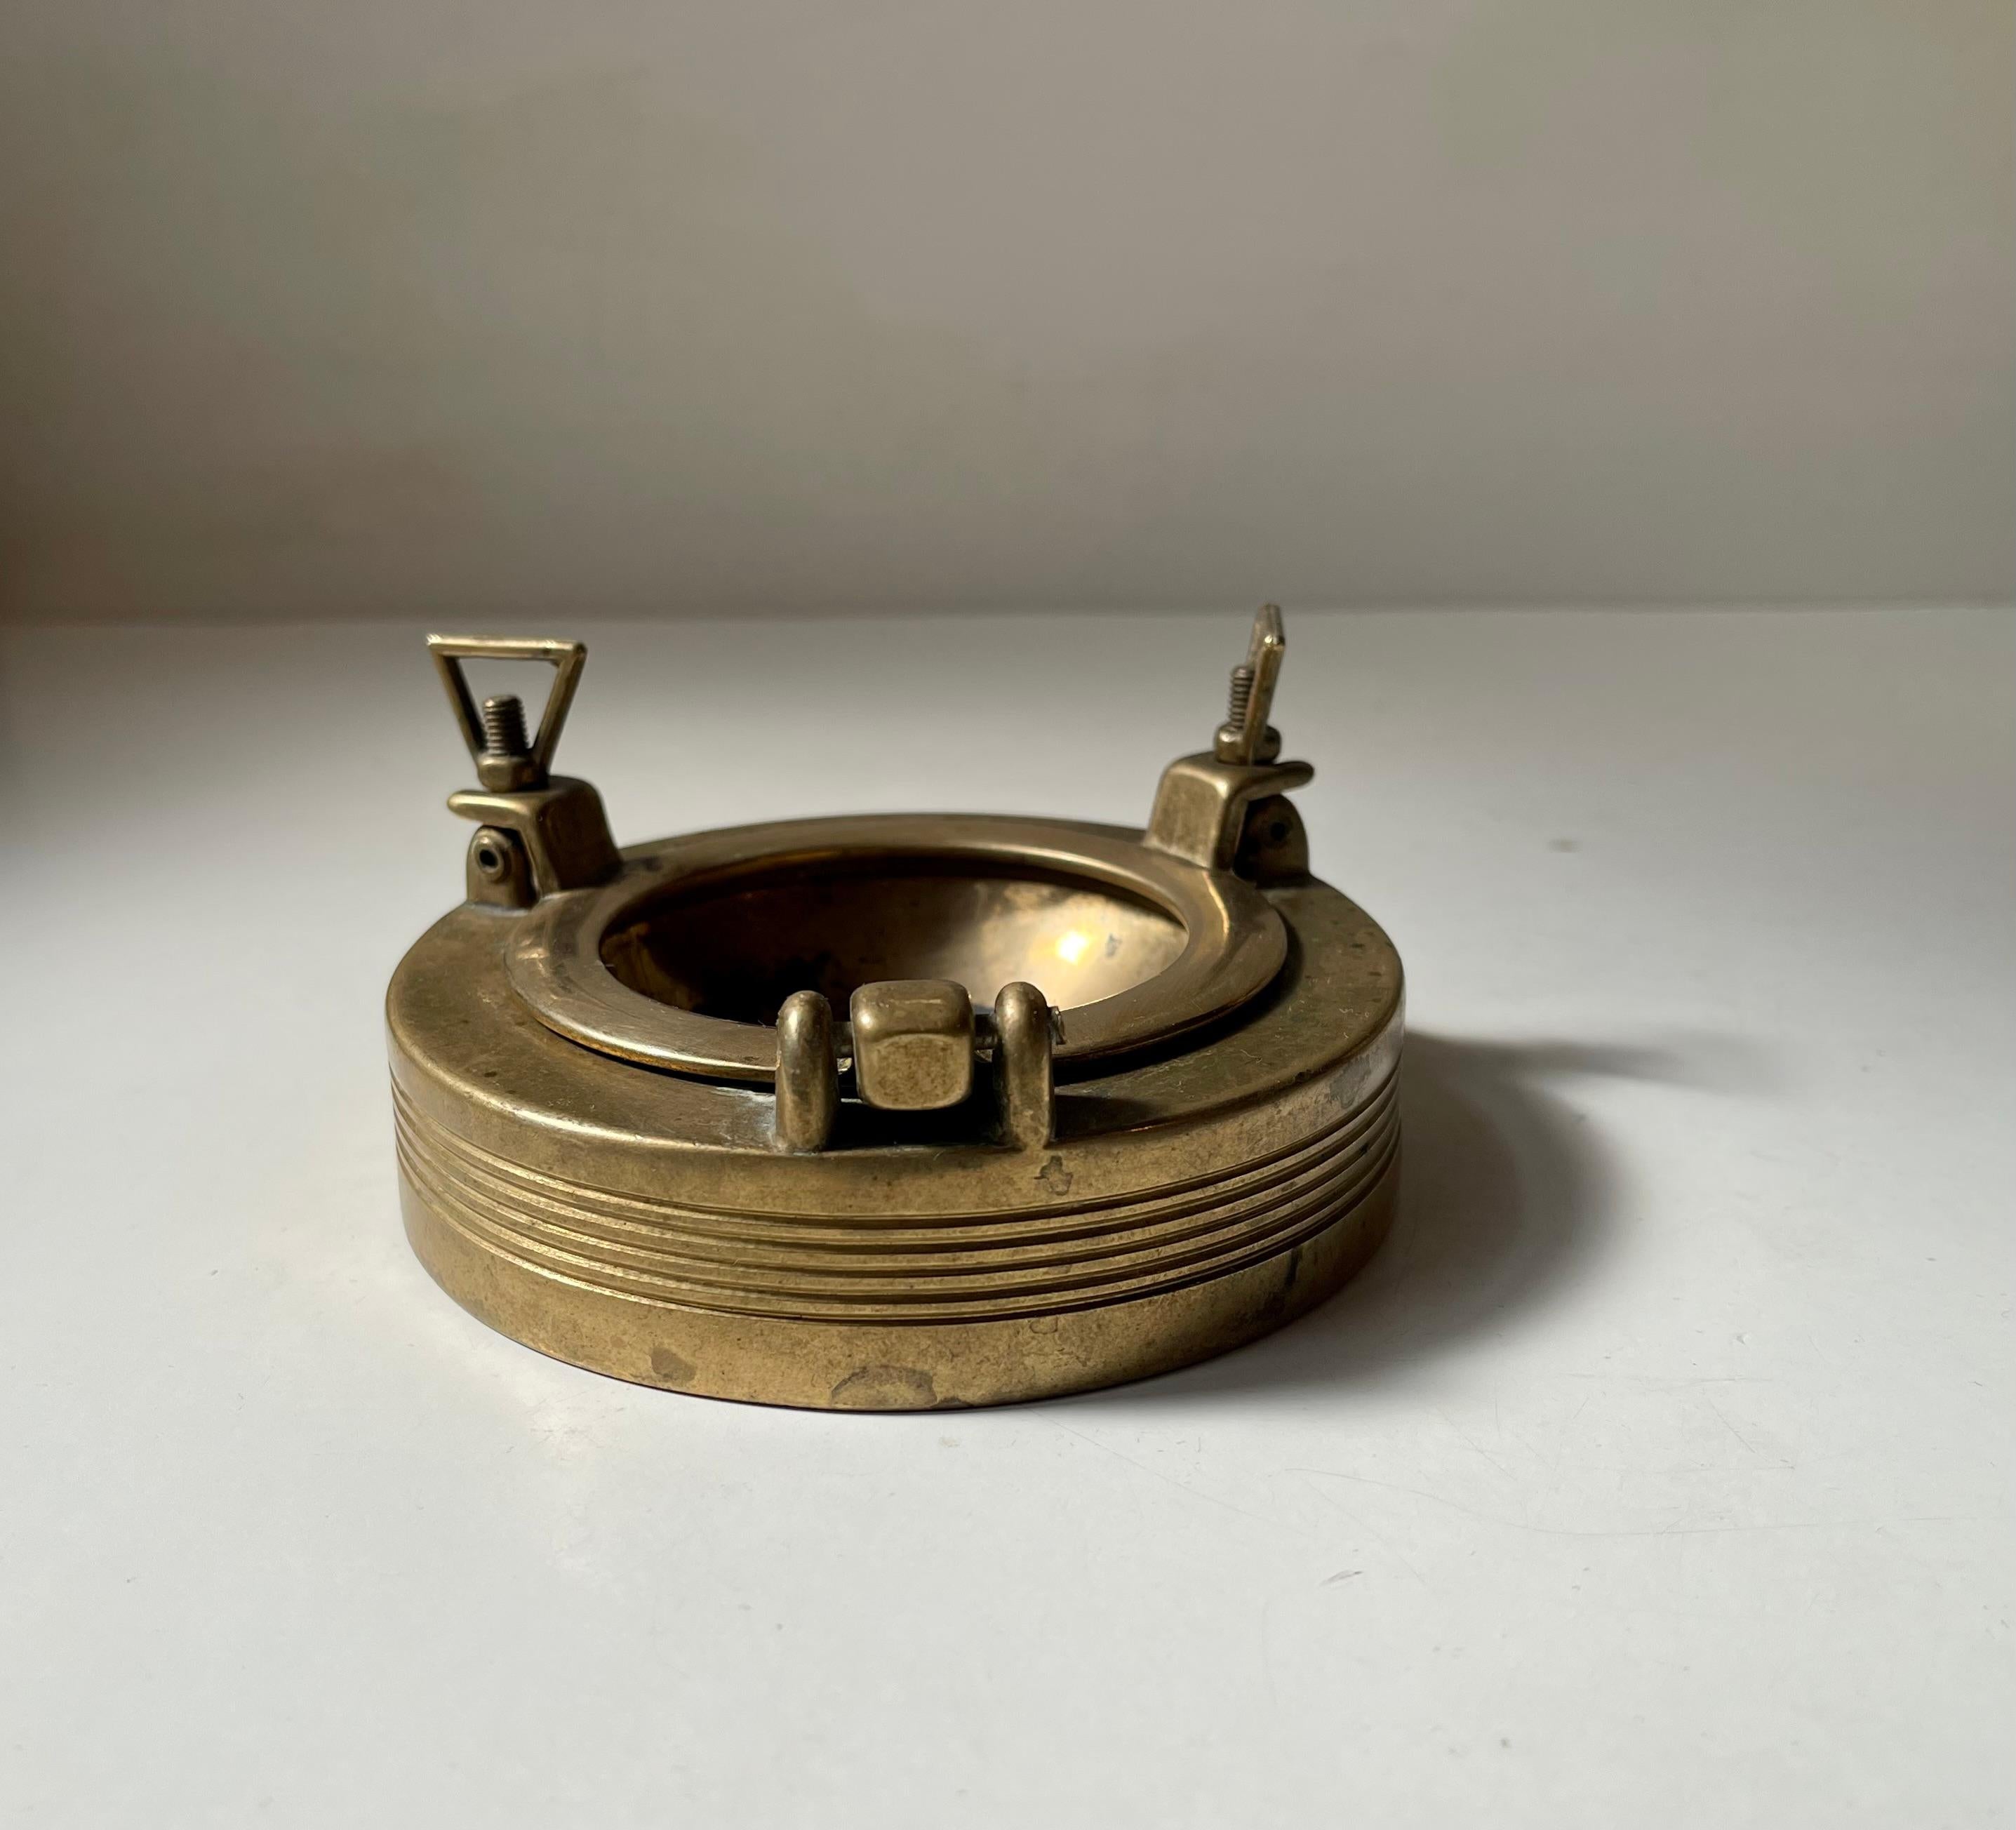 A novelty in-/outdoor ashtray in the shape of a ships porthole. It is made from solid brass that has patinated over the years. Made in Scandinavia during the 1950s. Measurements: D: 11 cm, H: 3/5,5 cm.